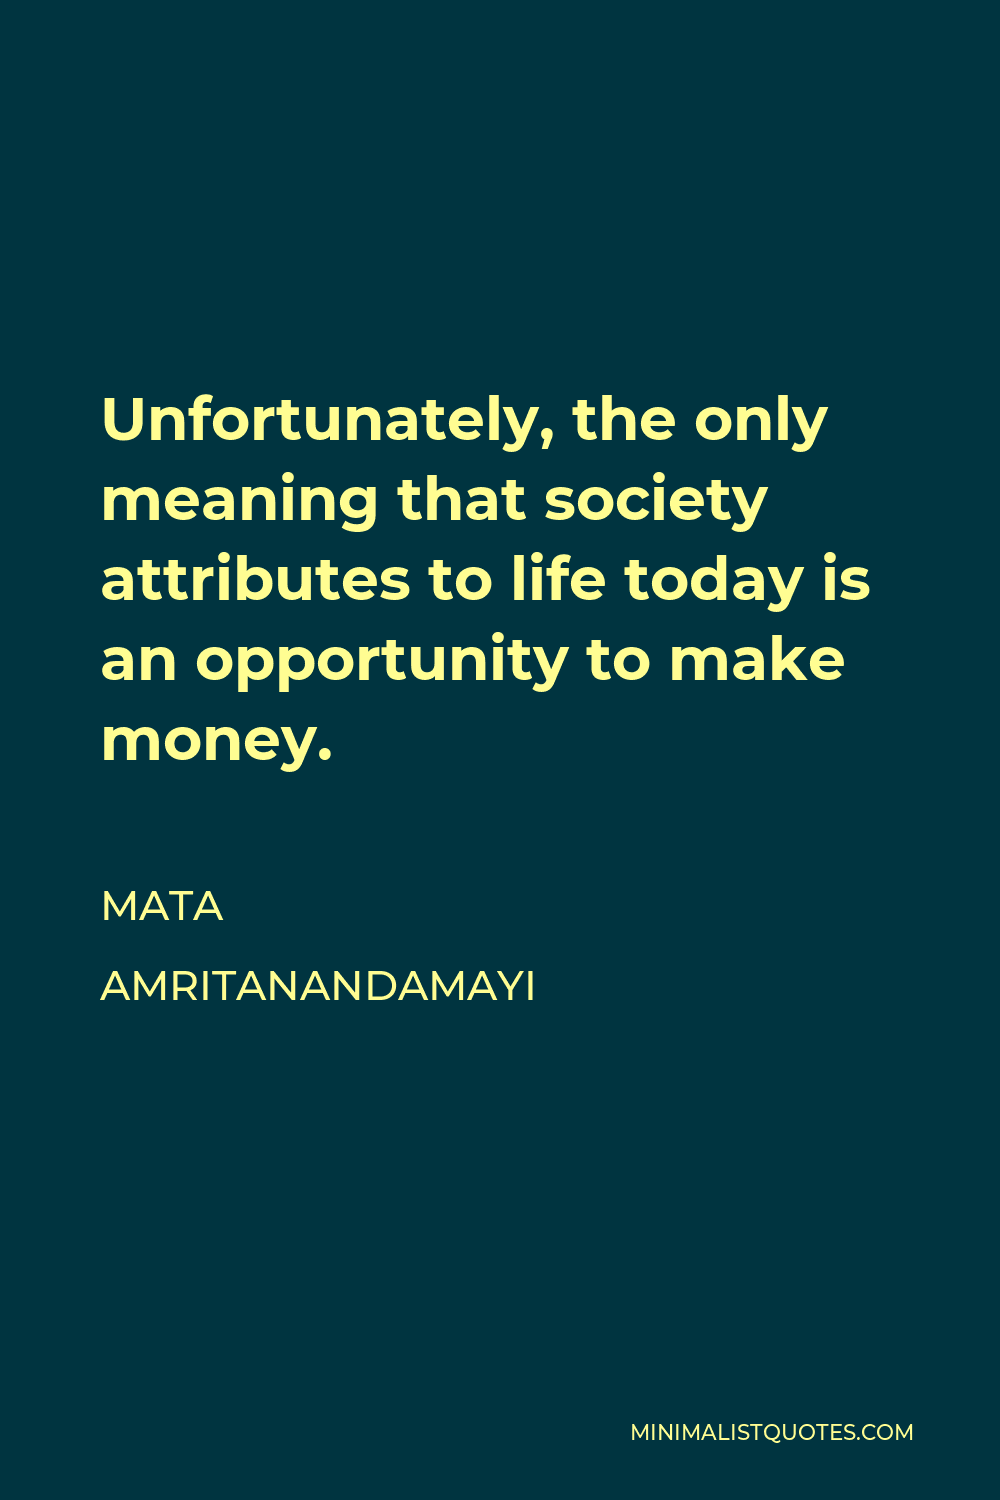 Mata Amritanandamayi Quote - Unfortunately, the only meaning that society attributes to life today is an opportunity to make money.